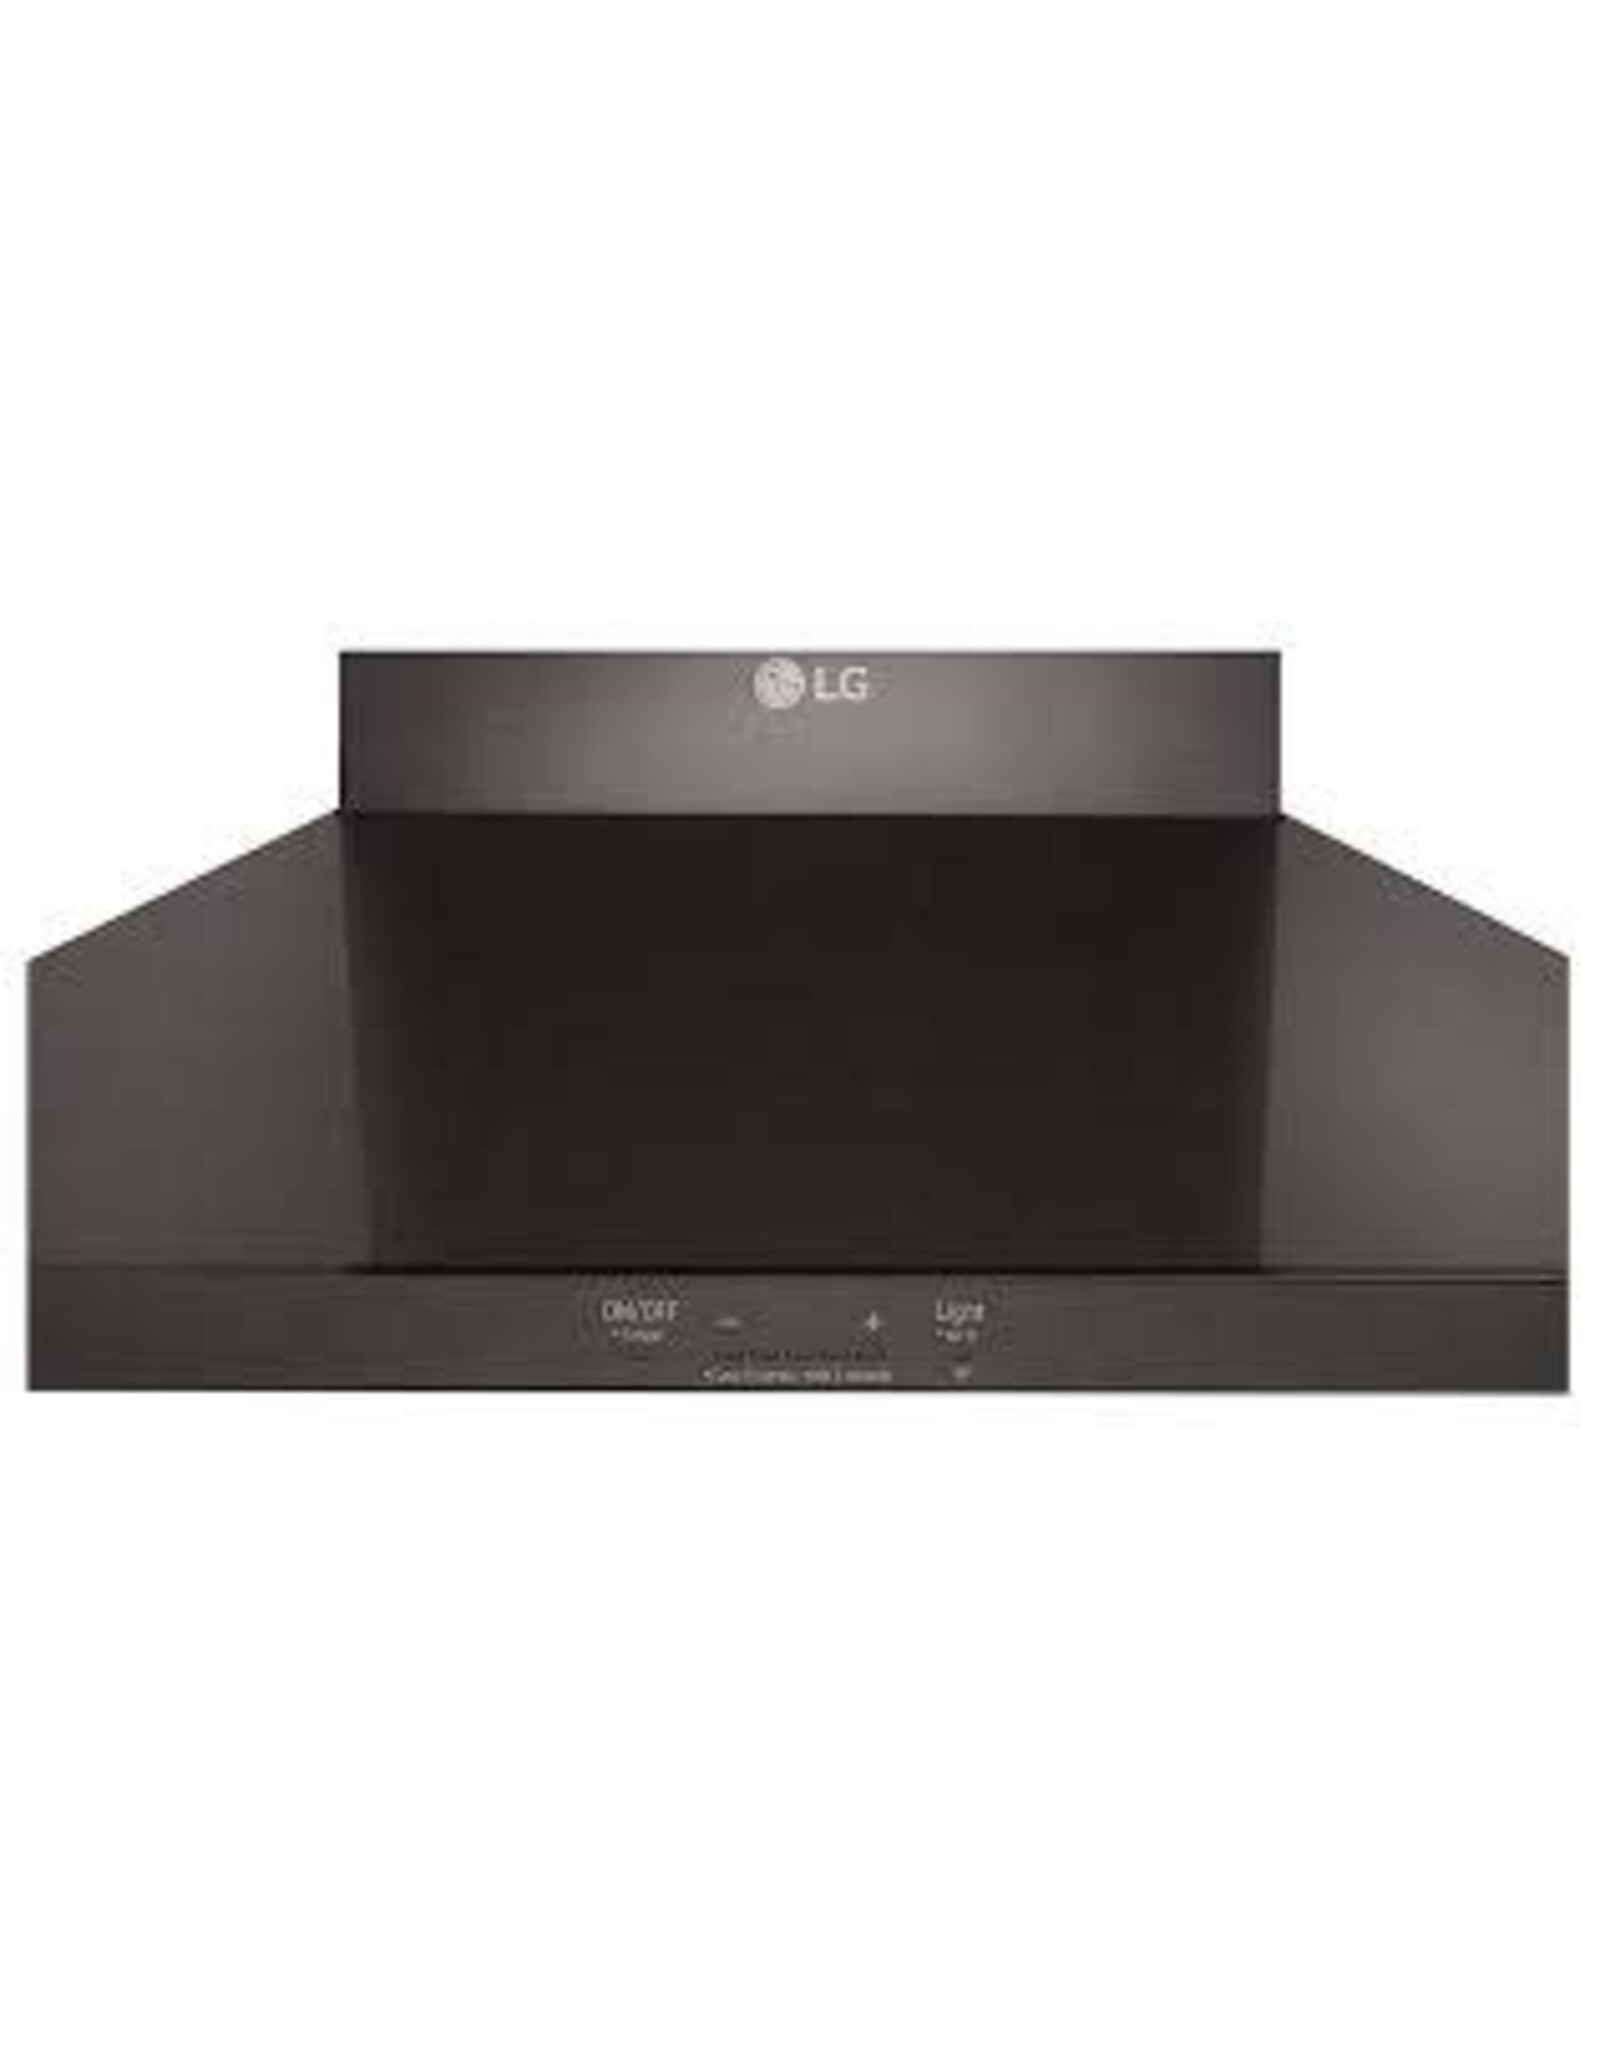 L.G HCED3015D 30 Inch Wall Mount Range Hood with 5 Speed 600 CFM Blower, Dishwasher Mesh Filters, Low Profile Body, IR Touch Controls, Dual Level LED Lighting, and UL Listed: Black Stainless Steel